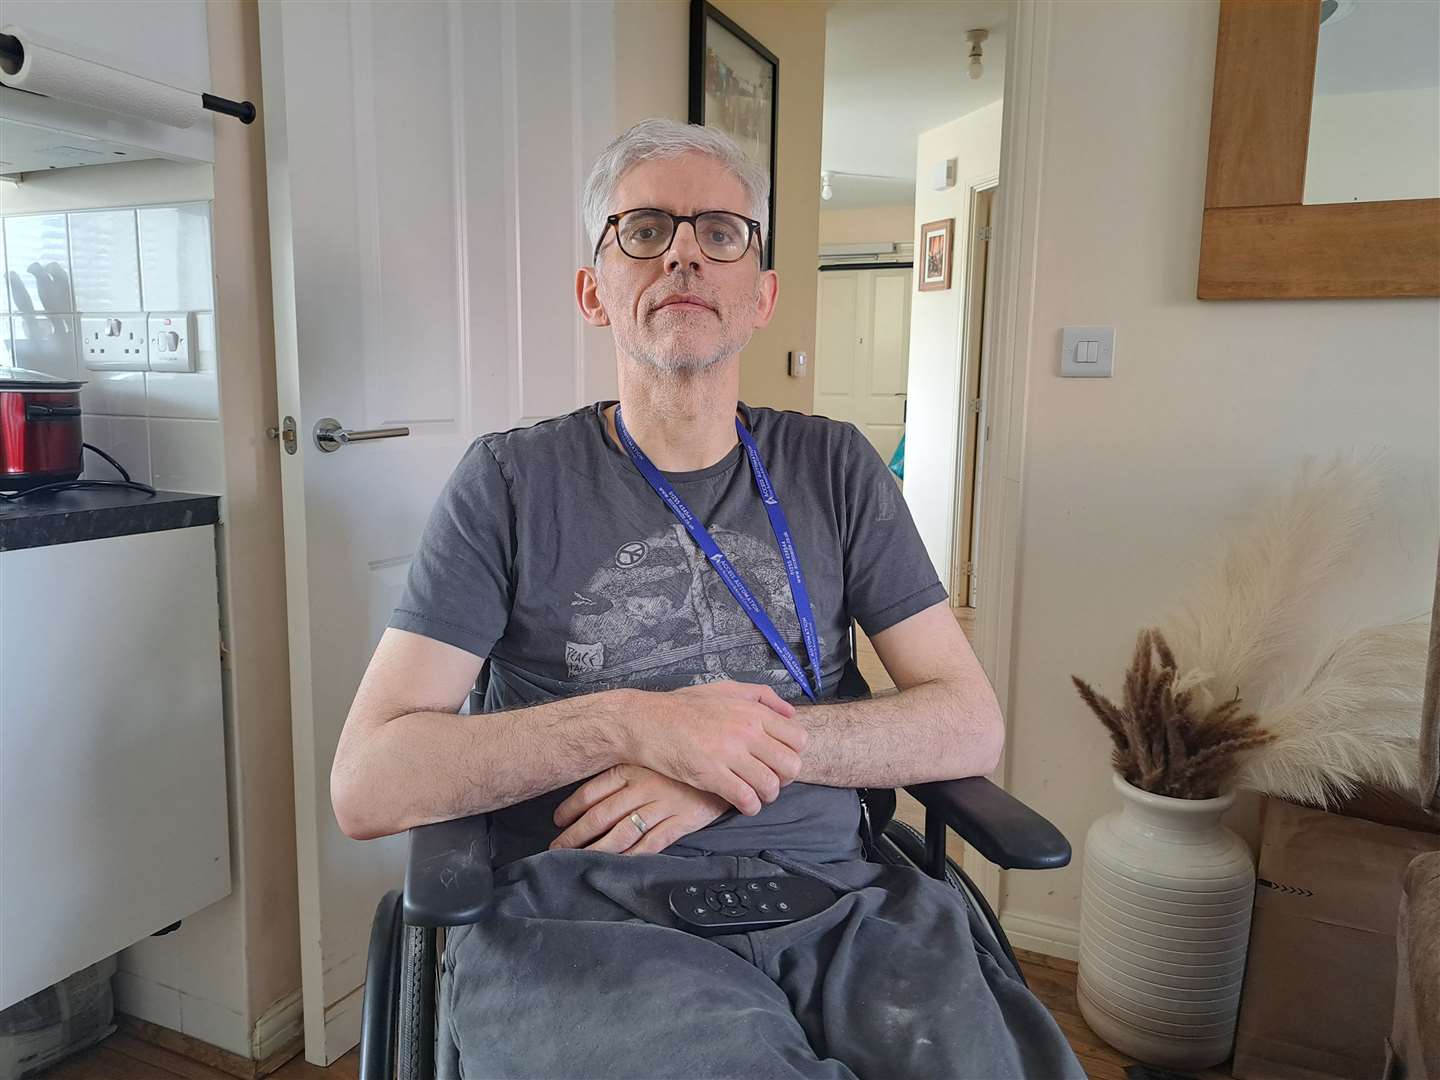 MS sufferer Christian Rolfe has recently had an operation for bowel cancer